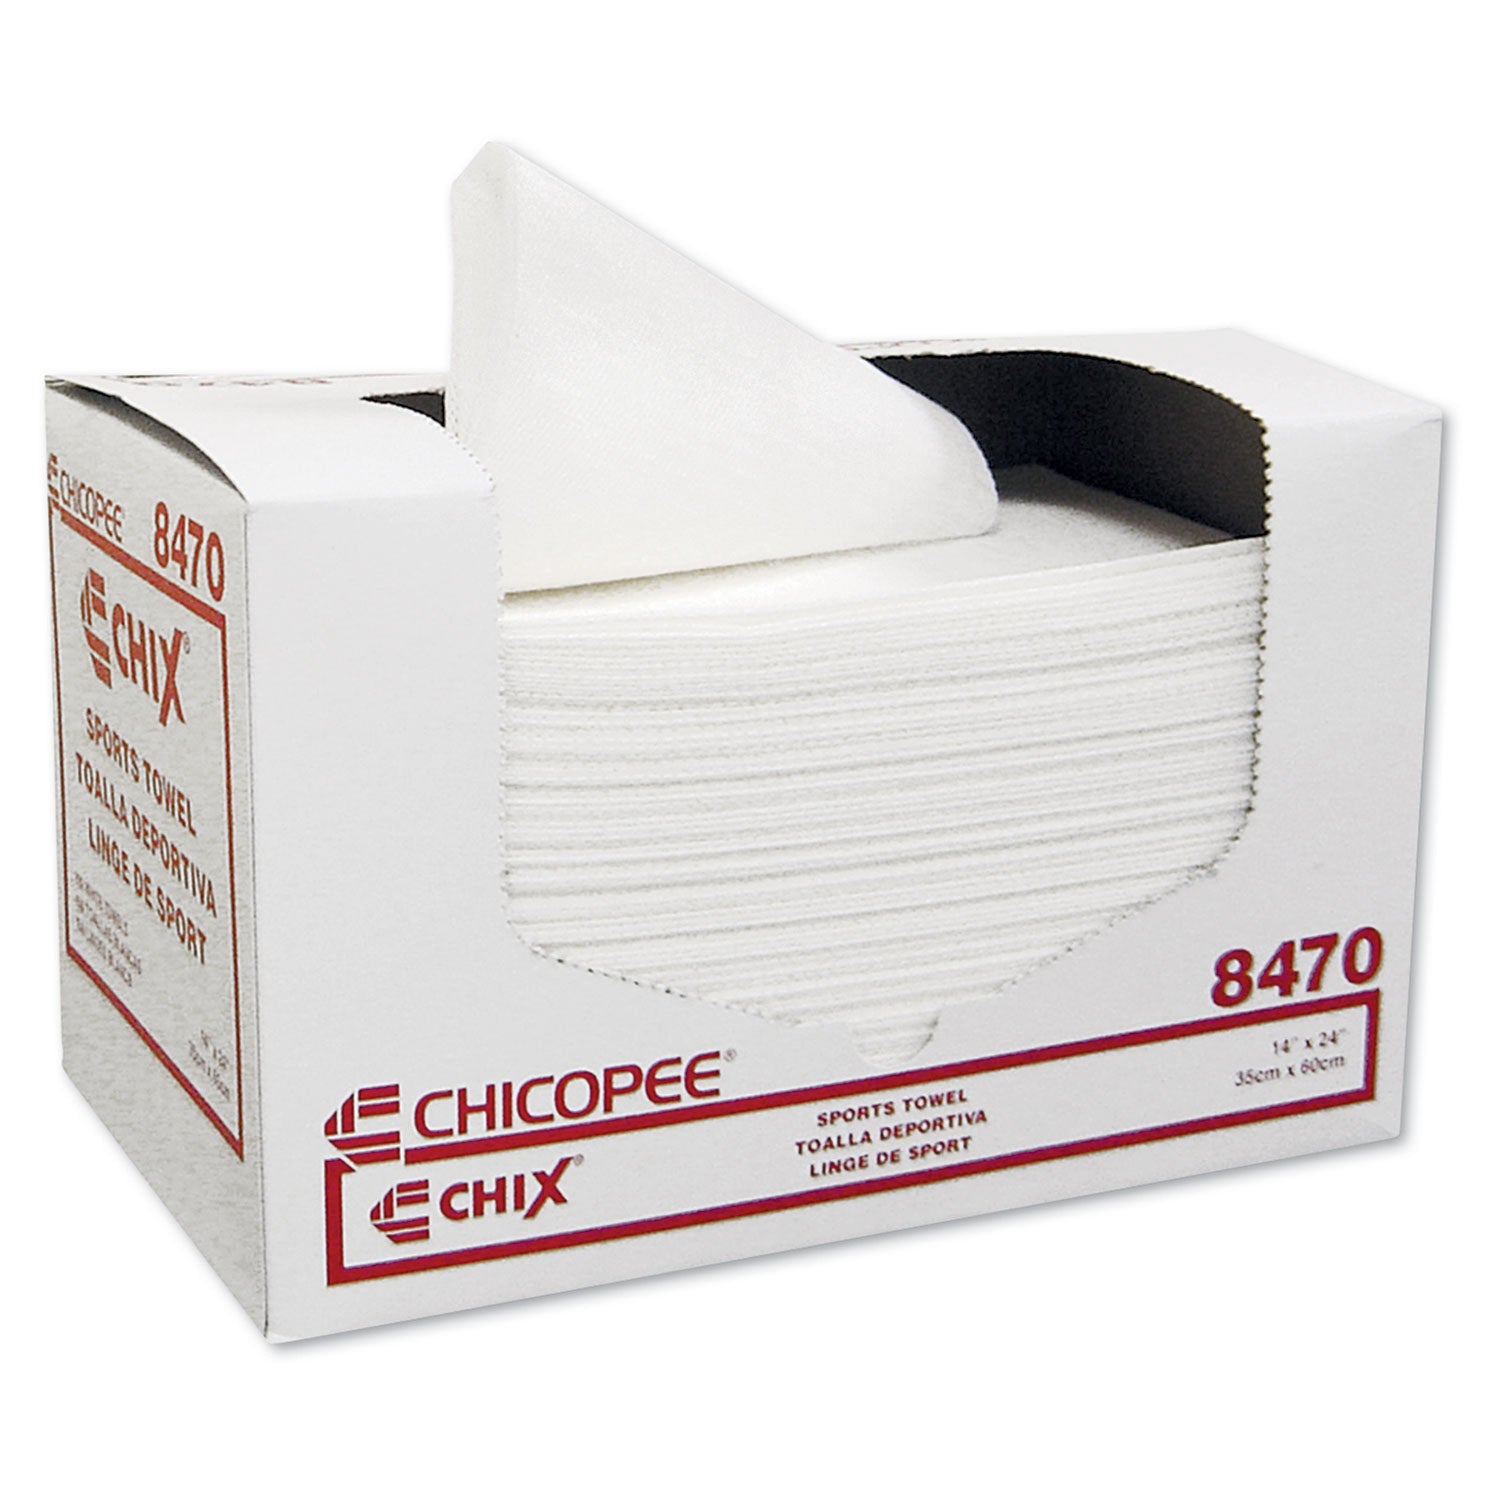 sports-towels-14-x-24-white-100-towels-pack-6-packs-carton_chi8470 - 1